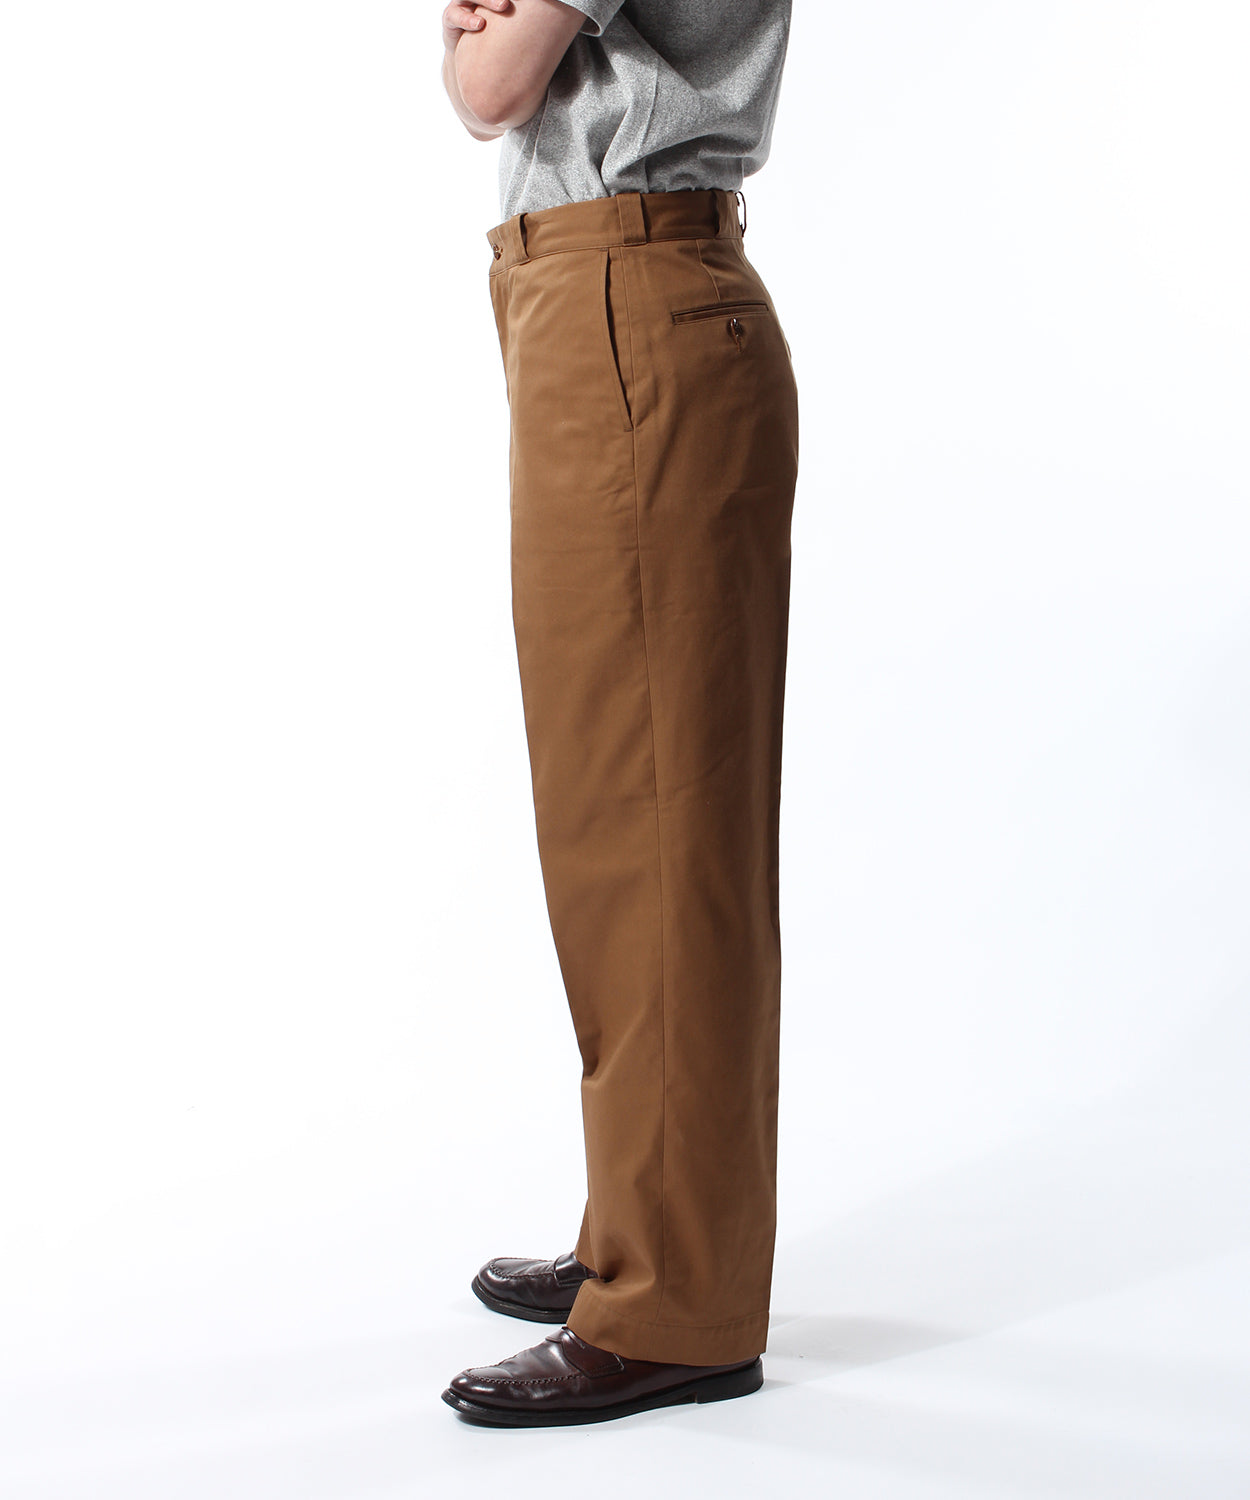 YANKSHIRE] Trousers 1963 Stay Pressed Twill